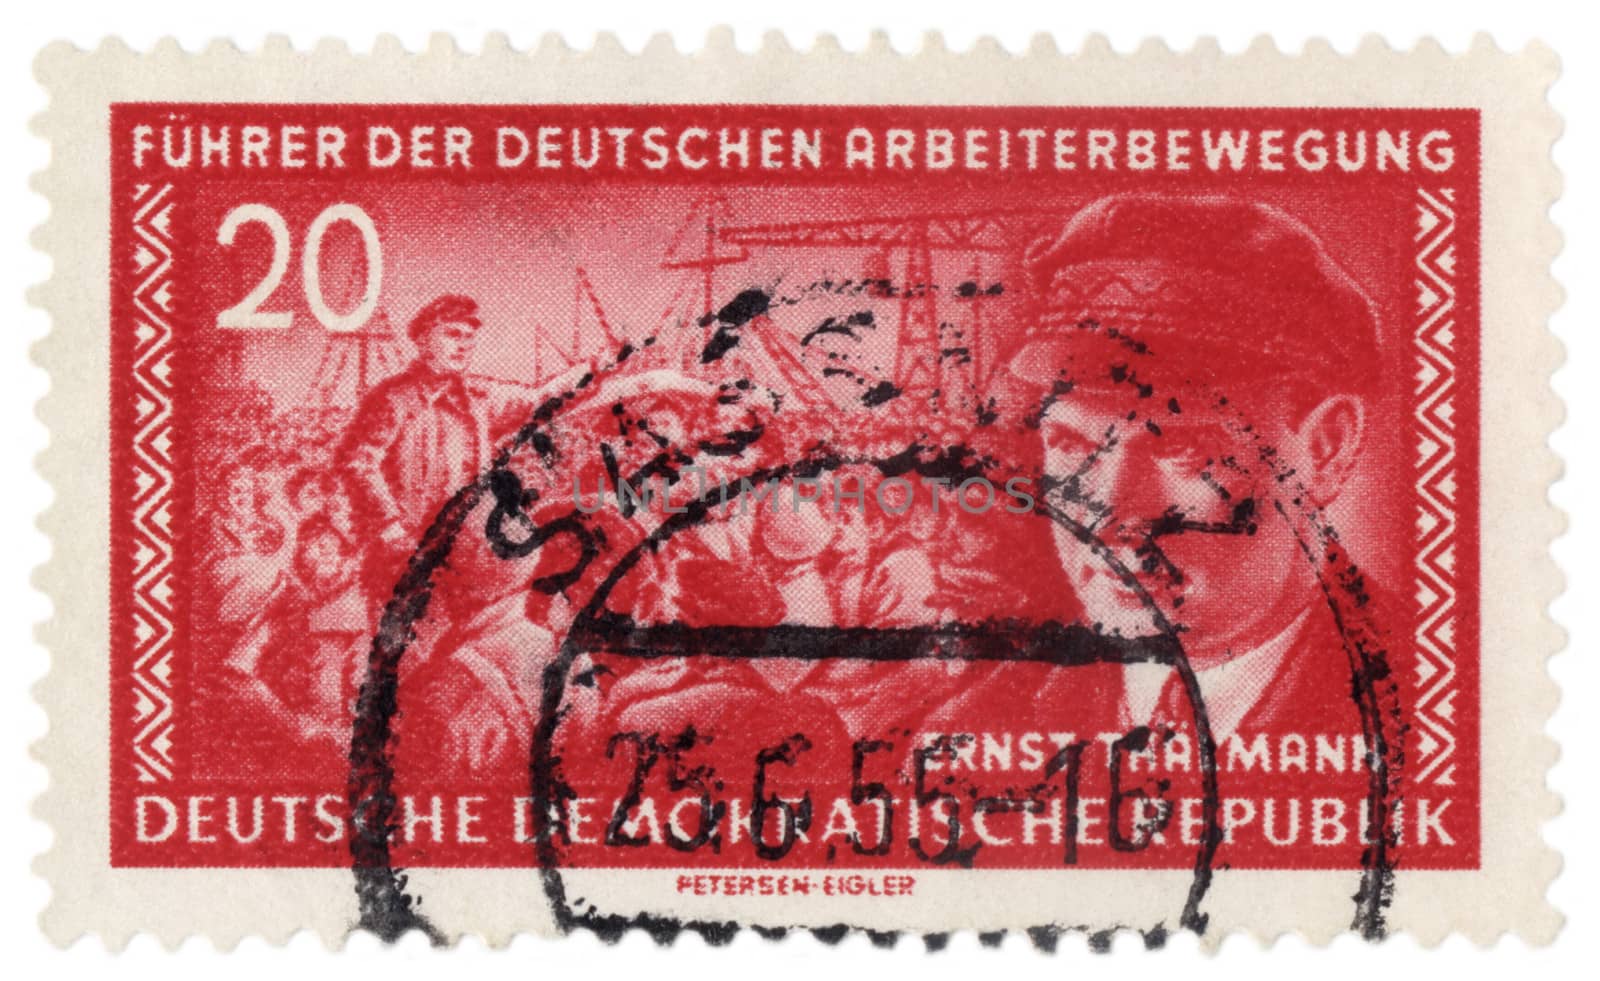 GDR - CIRCA 1960s: A stamp printed in GDR (East Germany) shows Ernst Telman (1886-1944), leader of the Communist Party of Germany, circa 1960s